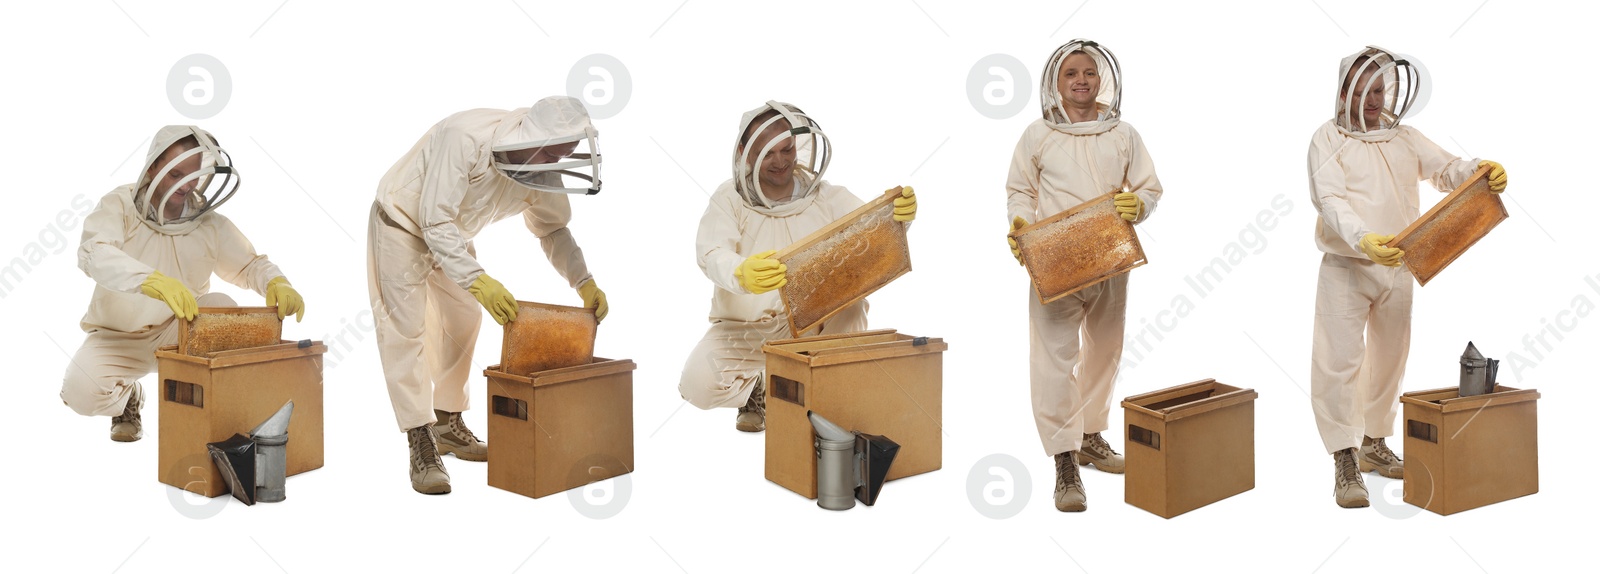 Image of Collage with photos of beekeeper in uniform holding frames with honeycombs on white background. Banner design